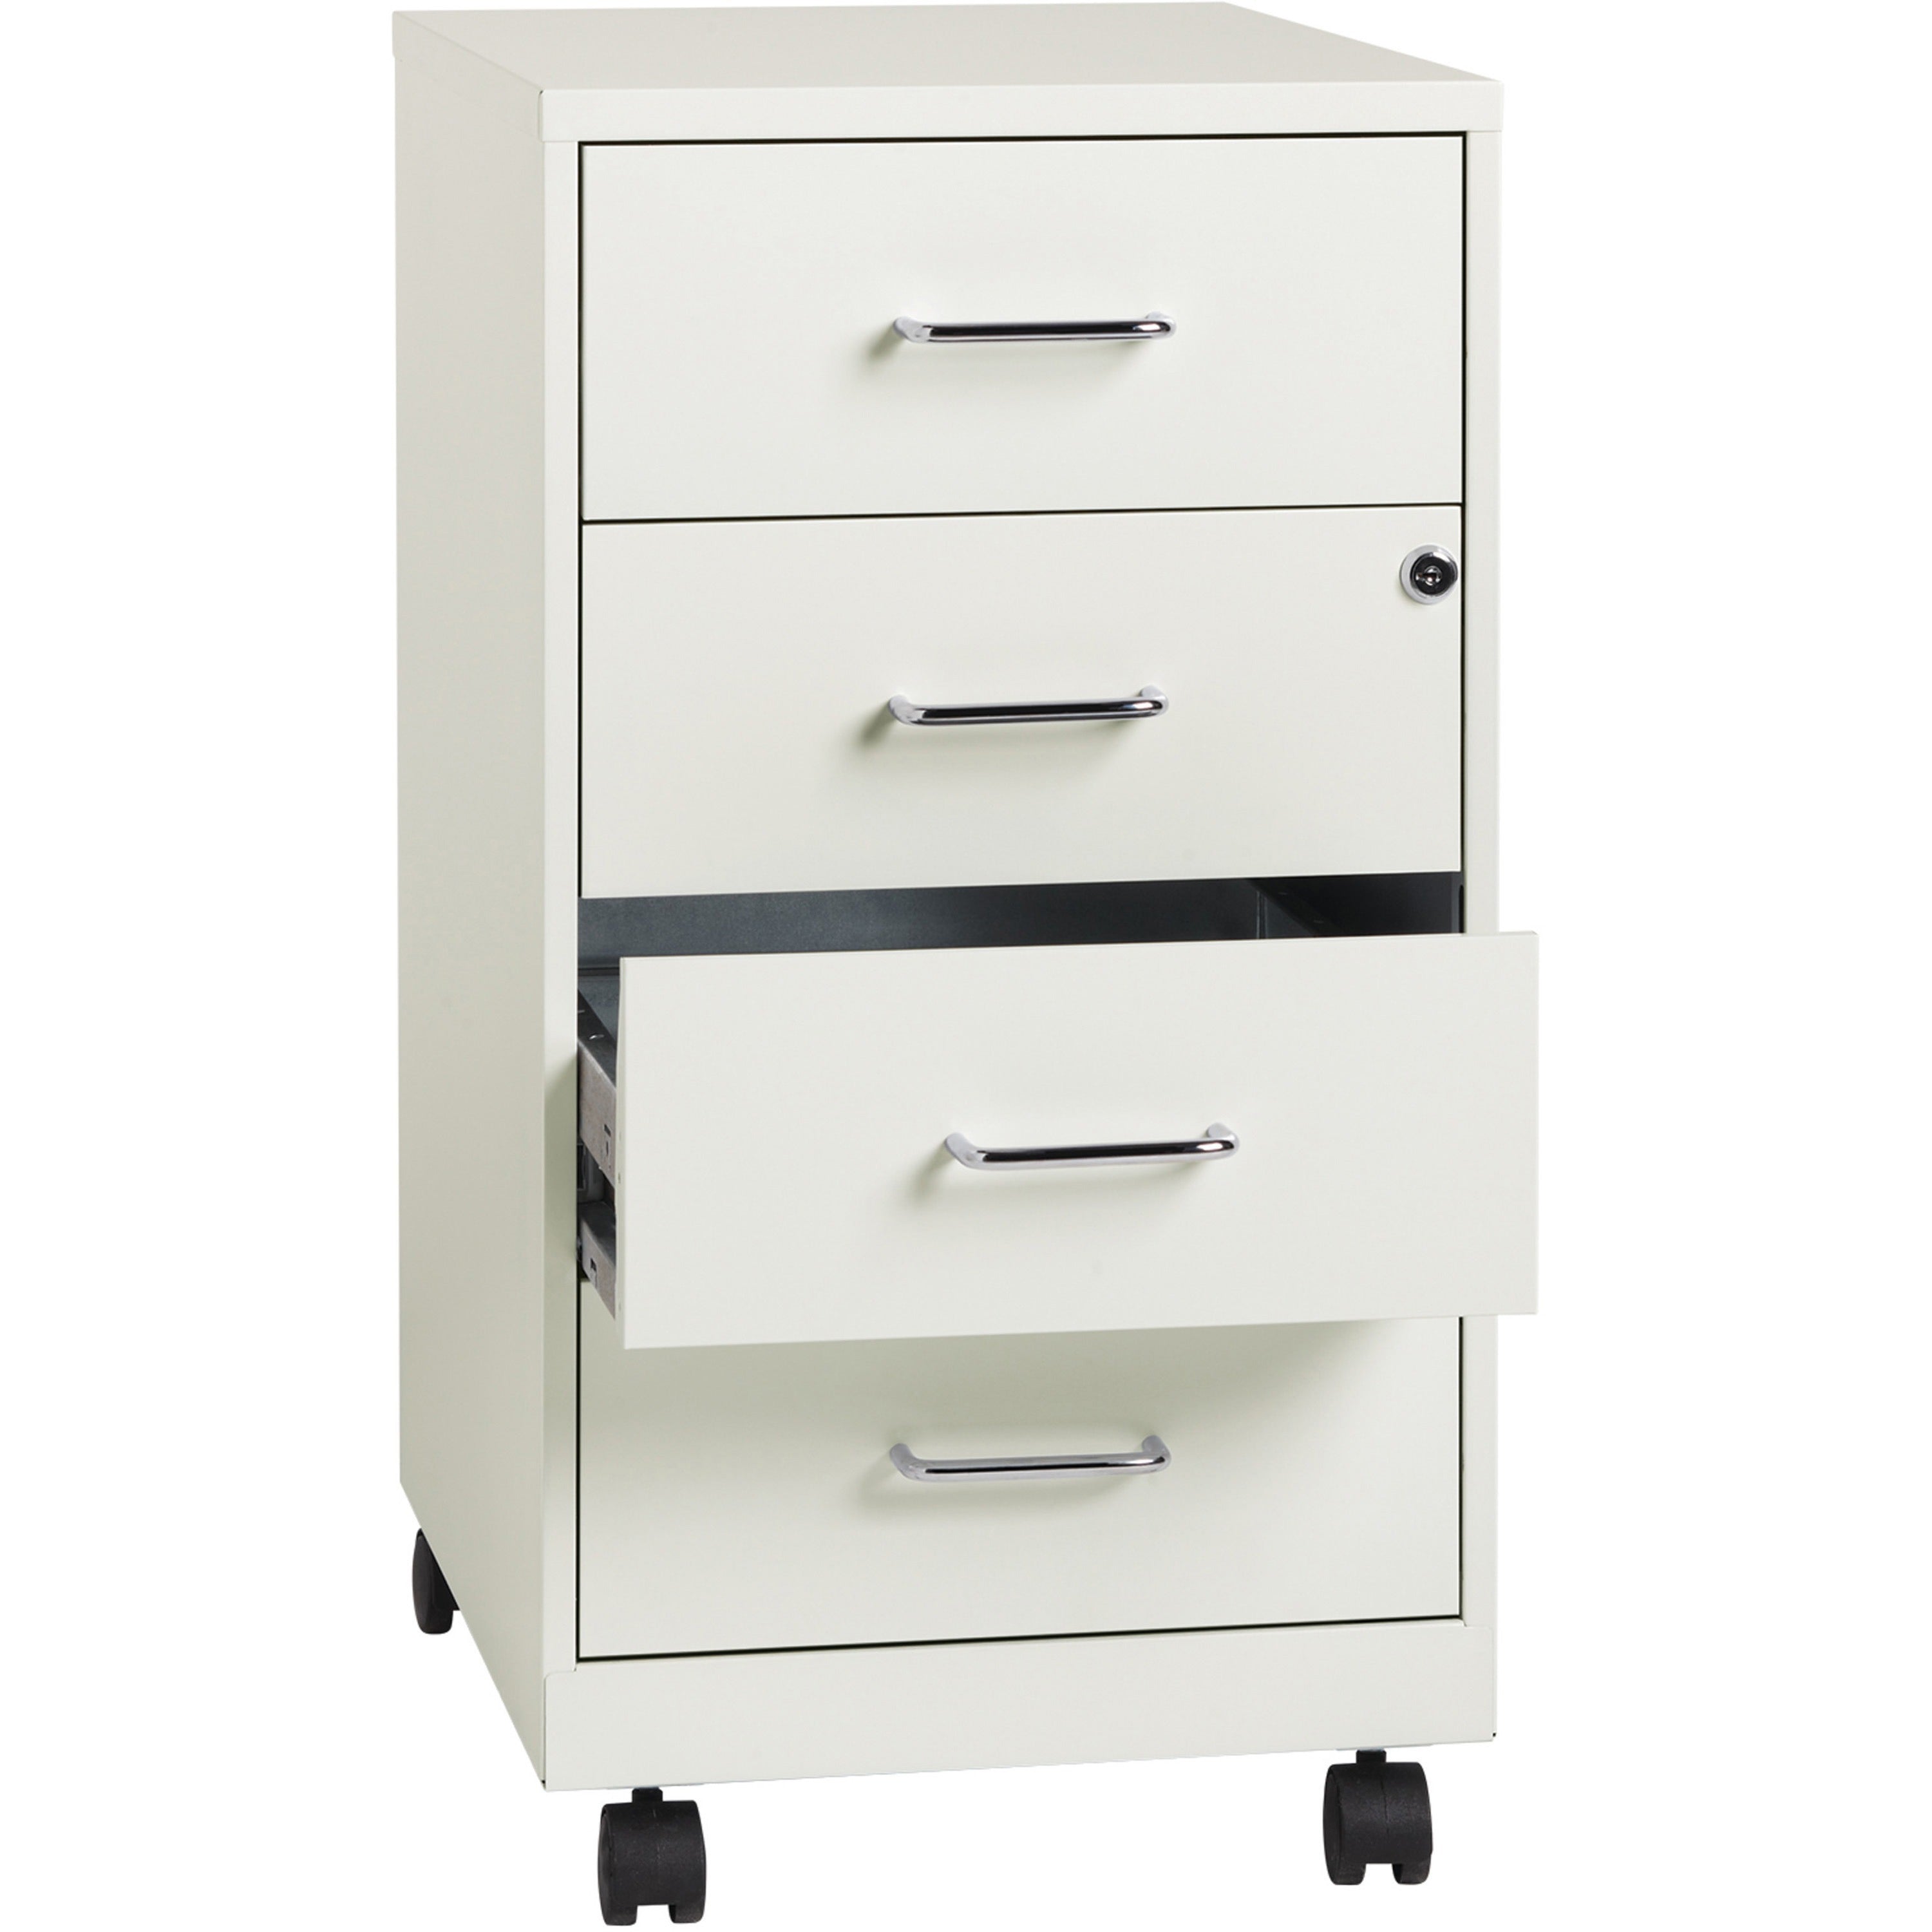 nusparc-mobile-storage-cabinet-142-x-18-x-265-4-x-drawers-letter-legal-mobility-glide-suspension-anti-tip-nonporous-surface-cam-lock-3-4-drawer-extension-white-painted-steel-recycled_nprvf418dmwe - 1